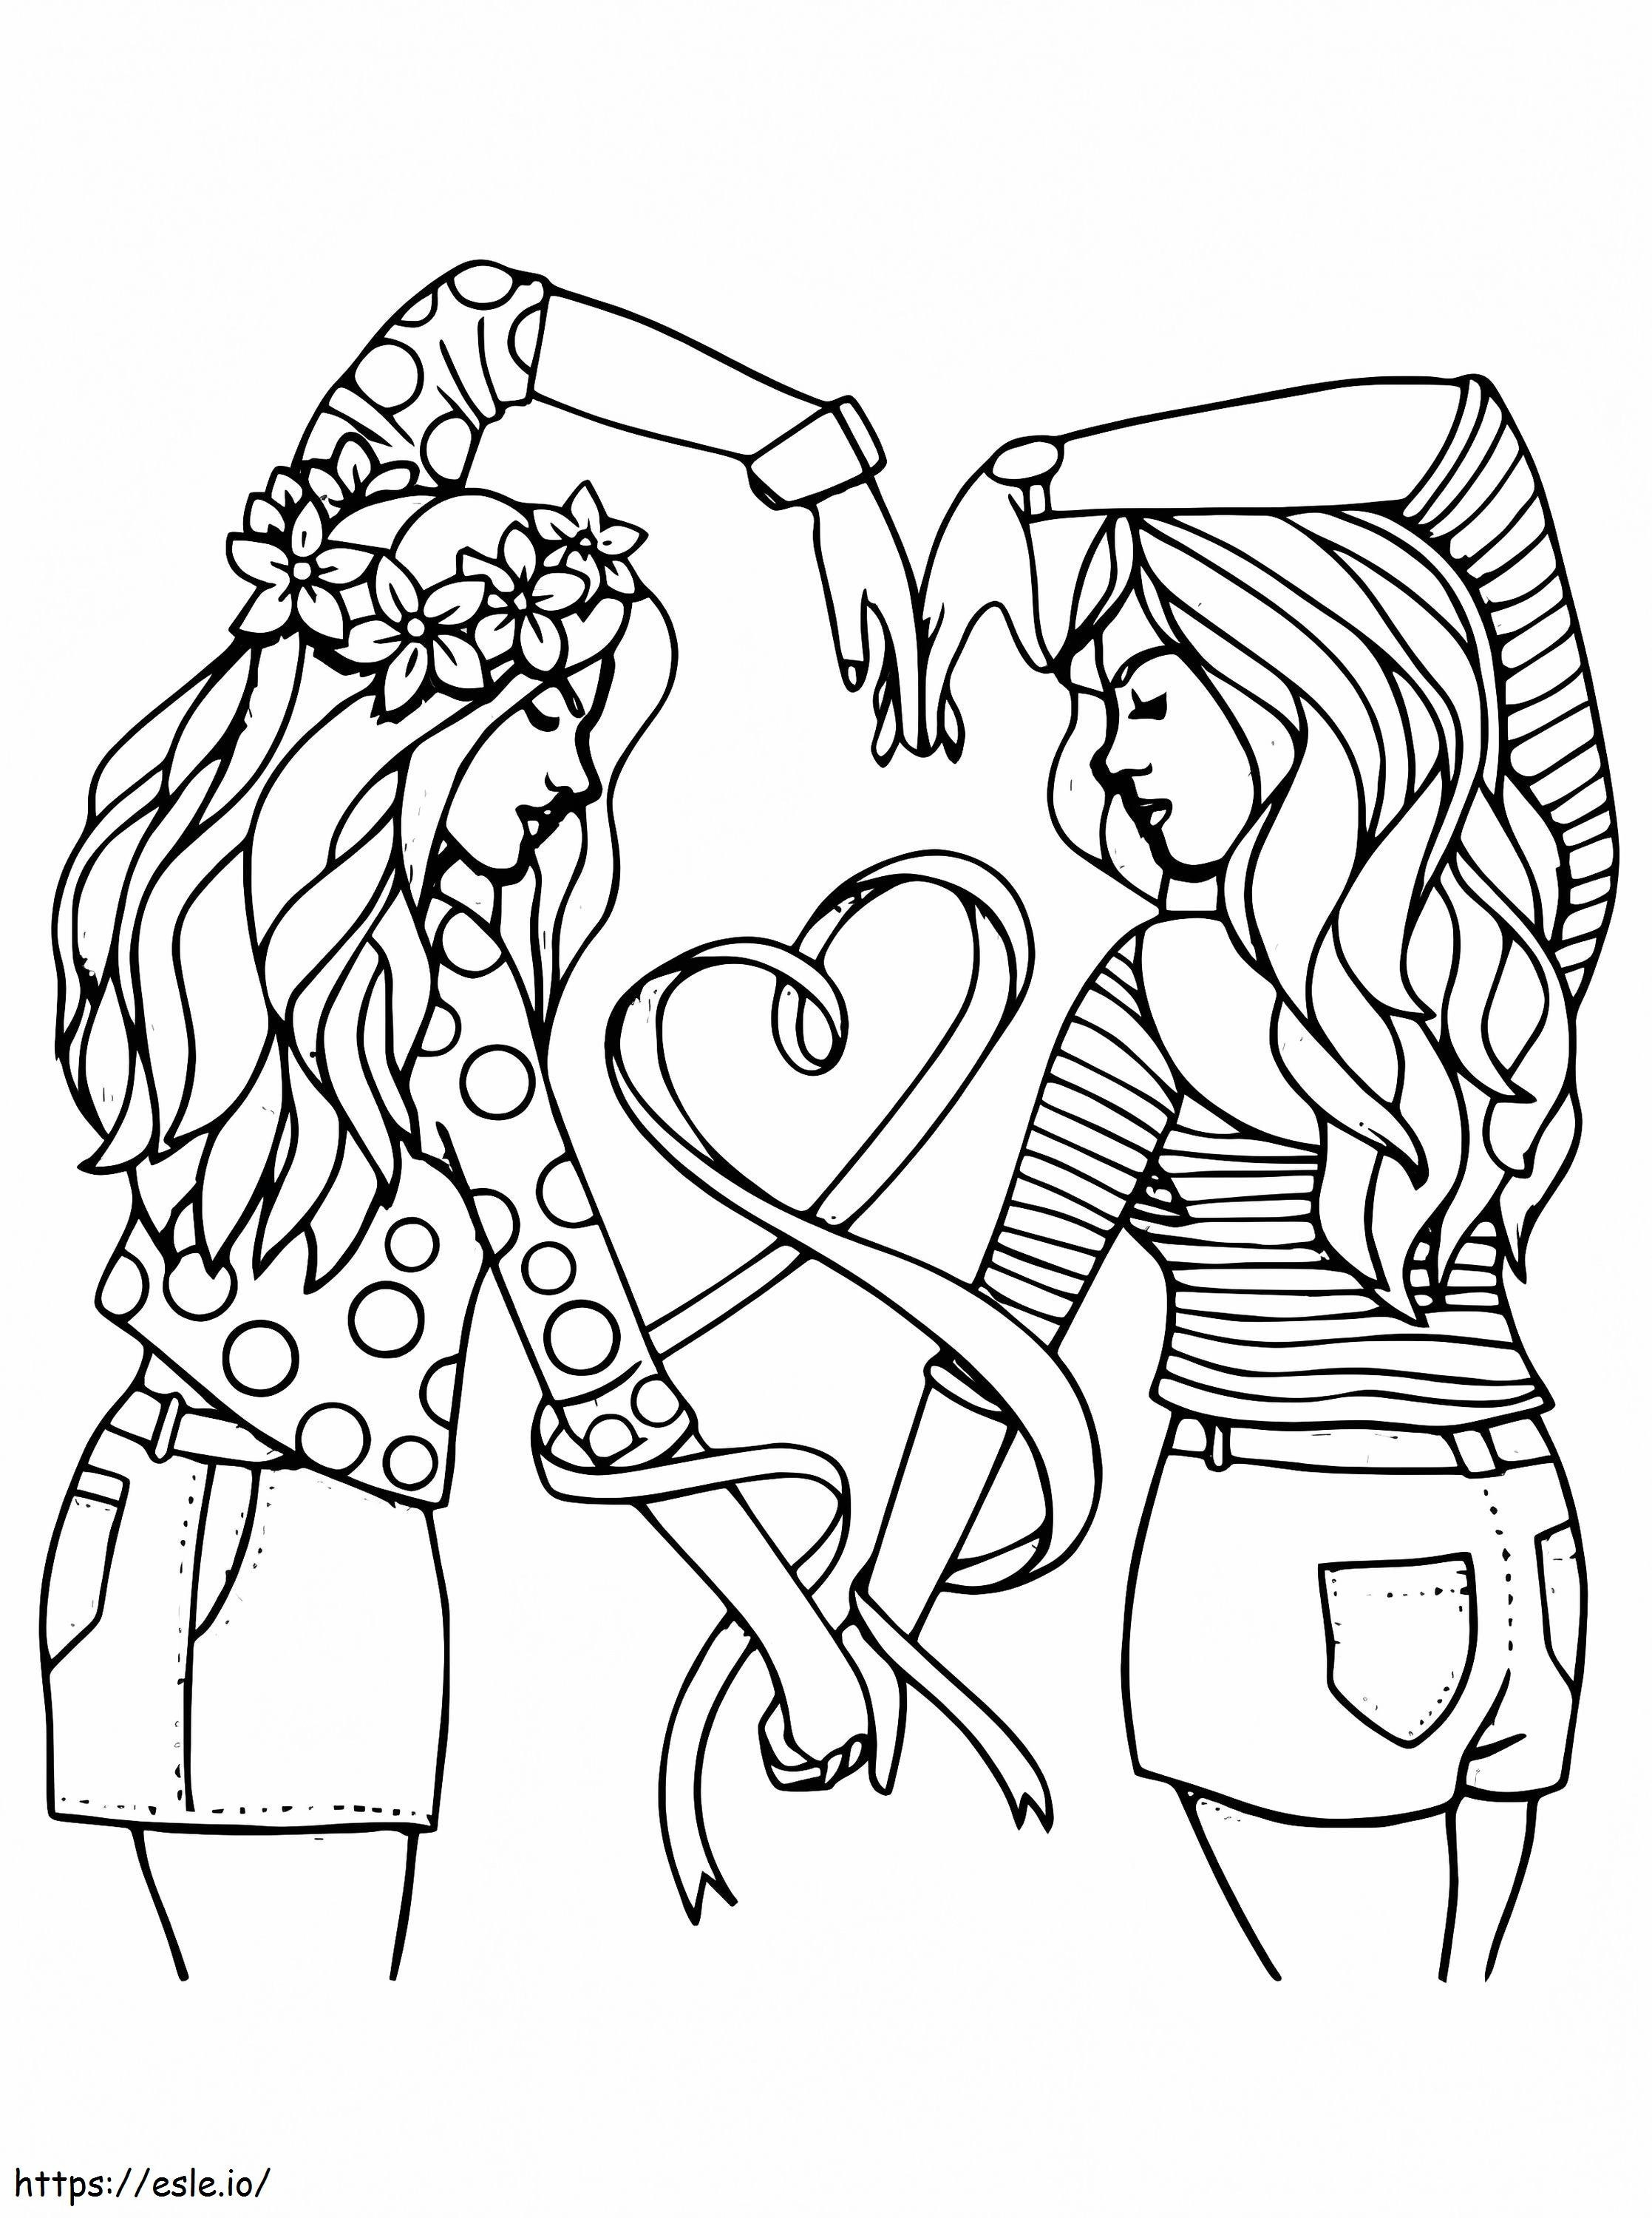 Best Friends 5 coloring page